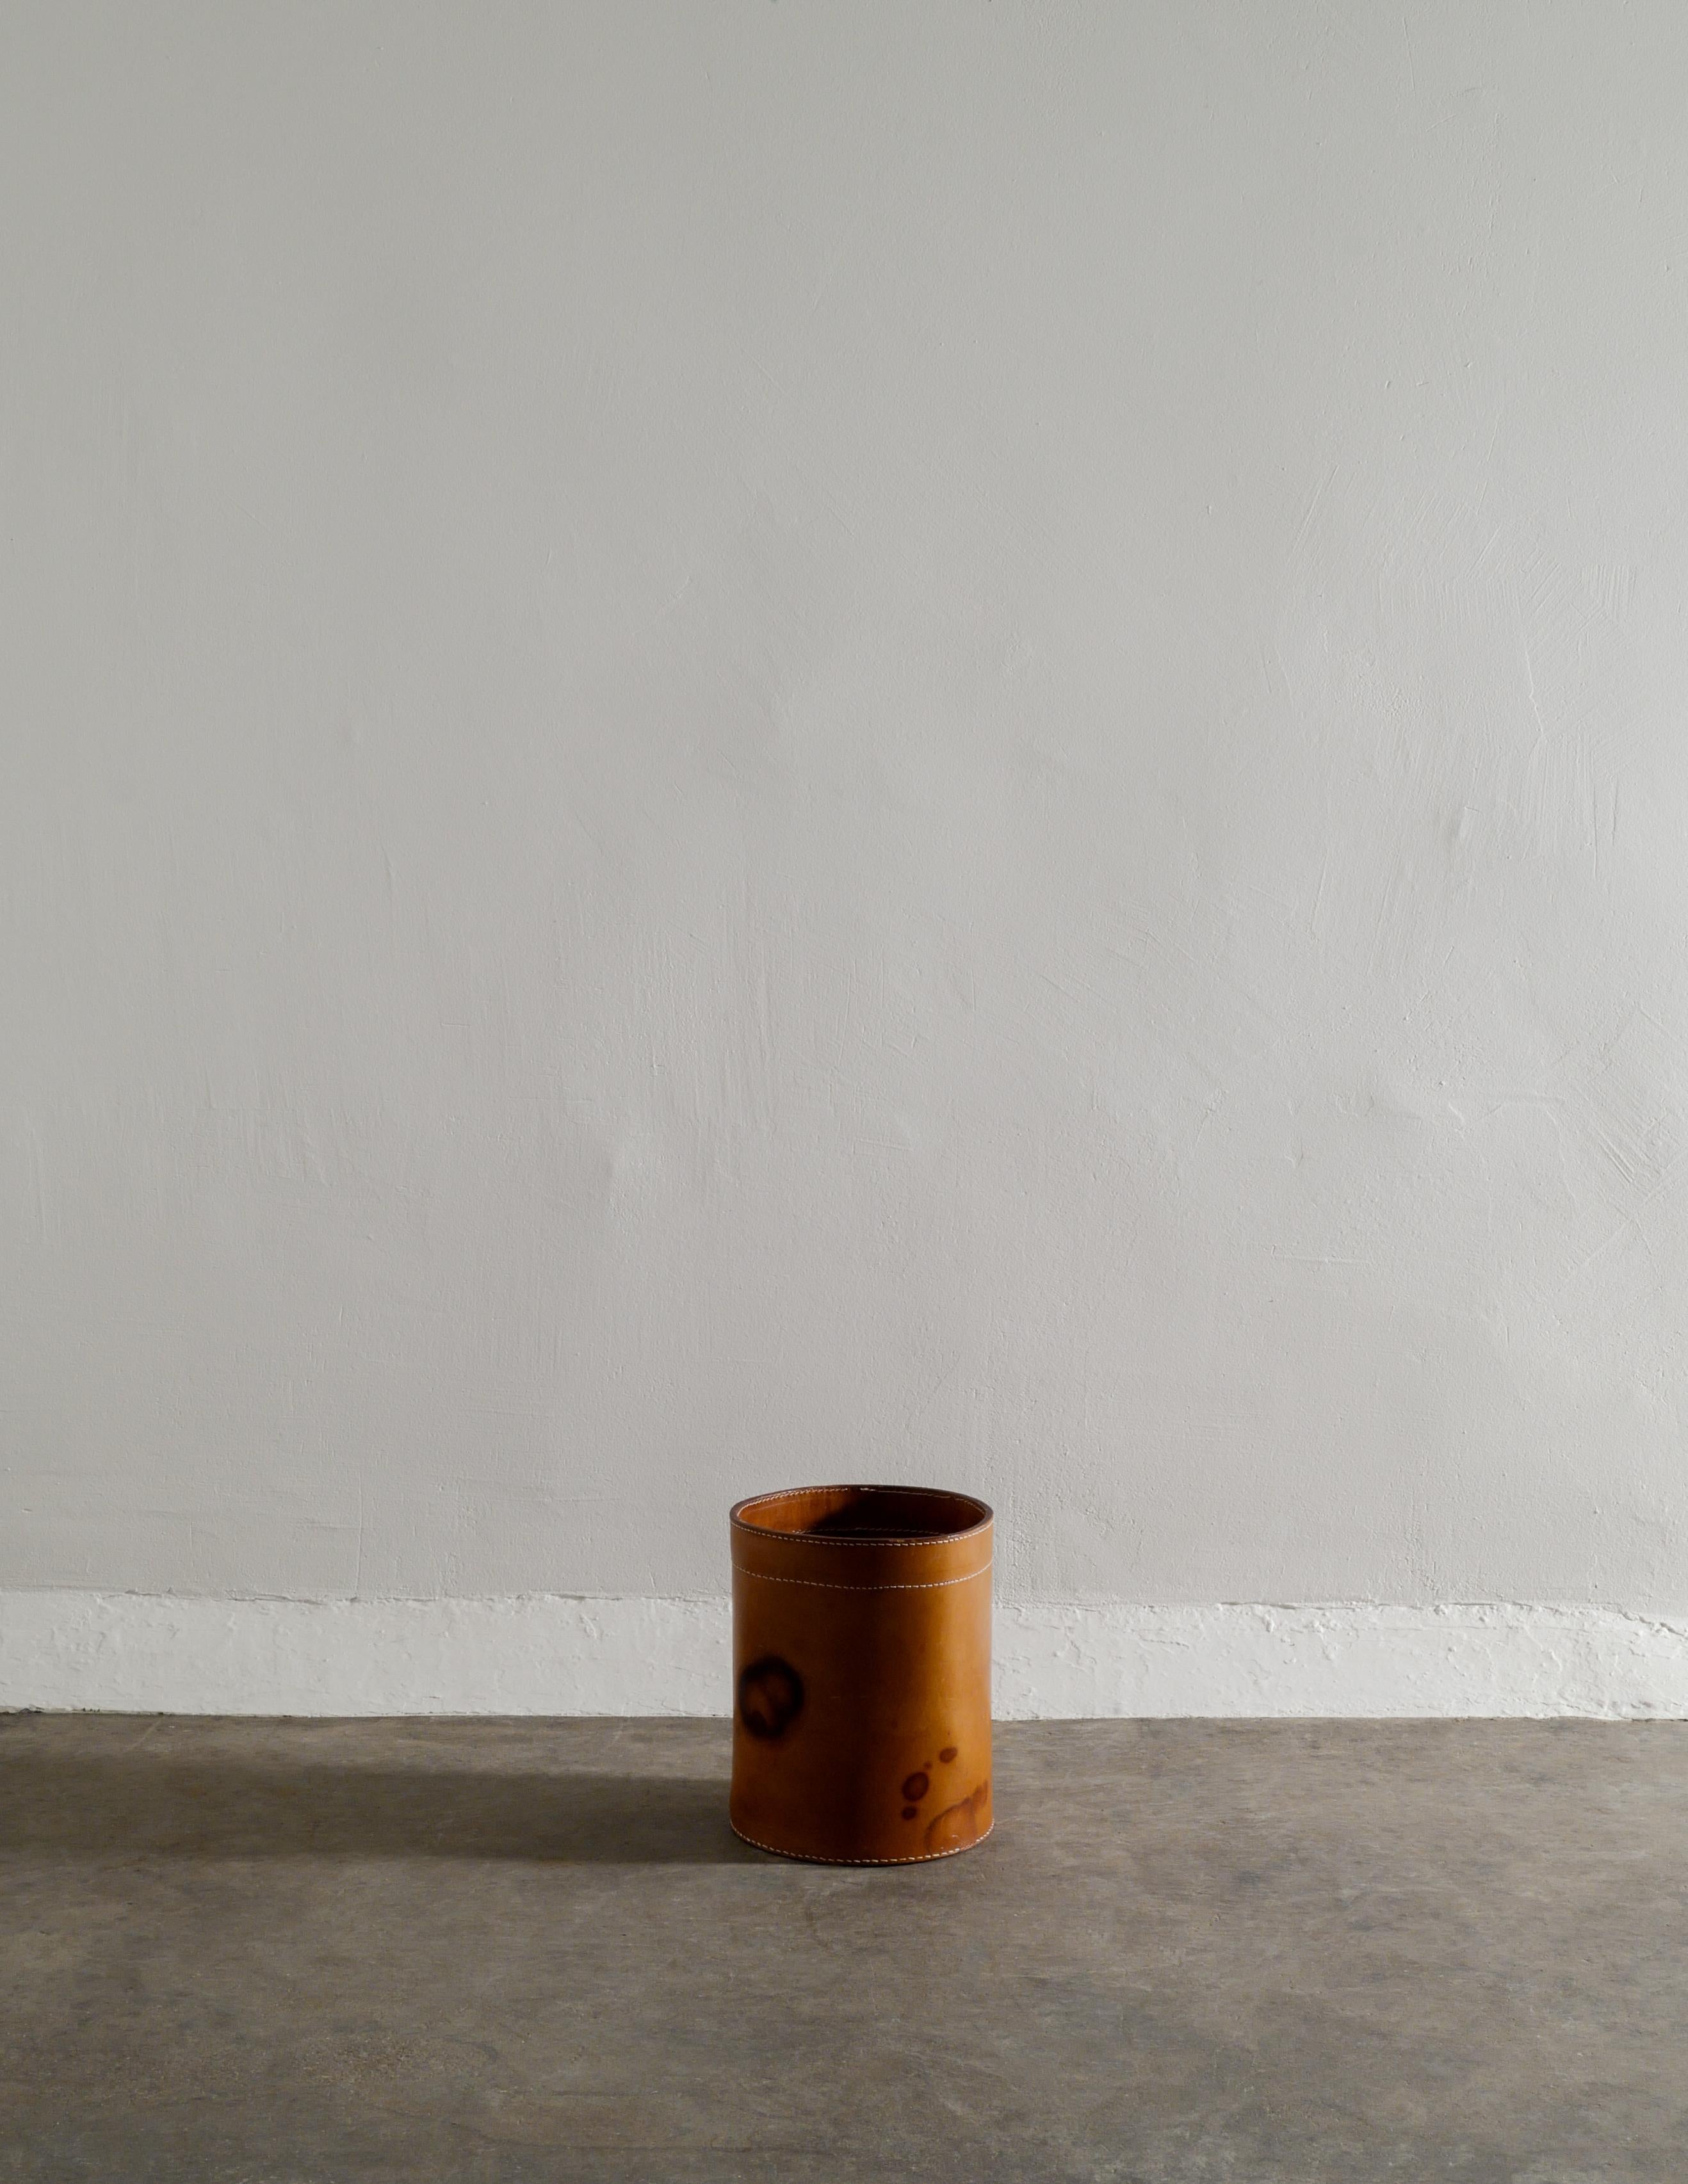 Rare paper / waste bin in patinated leather produced in Denmark in the 1960s. In good vintage and original condition. 

Dimensions: height: 29 cm, diameter: 24 cm.